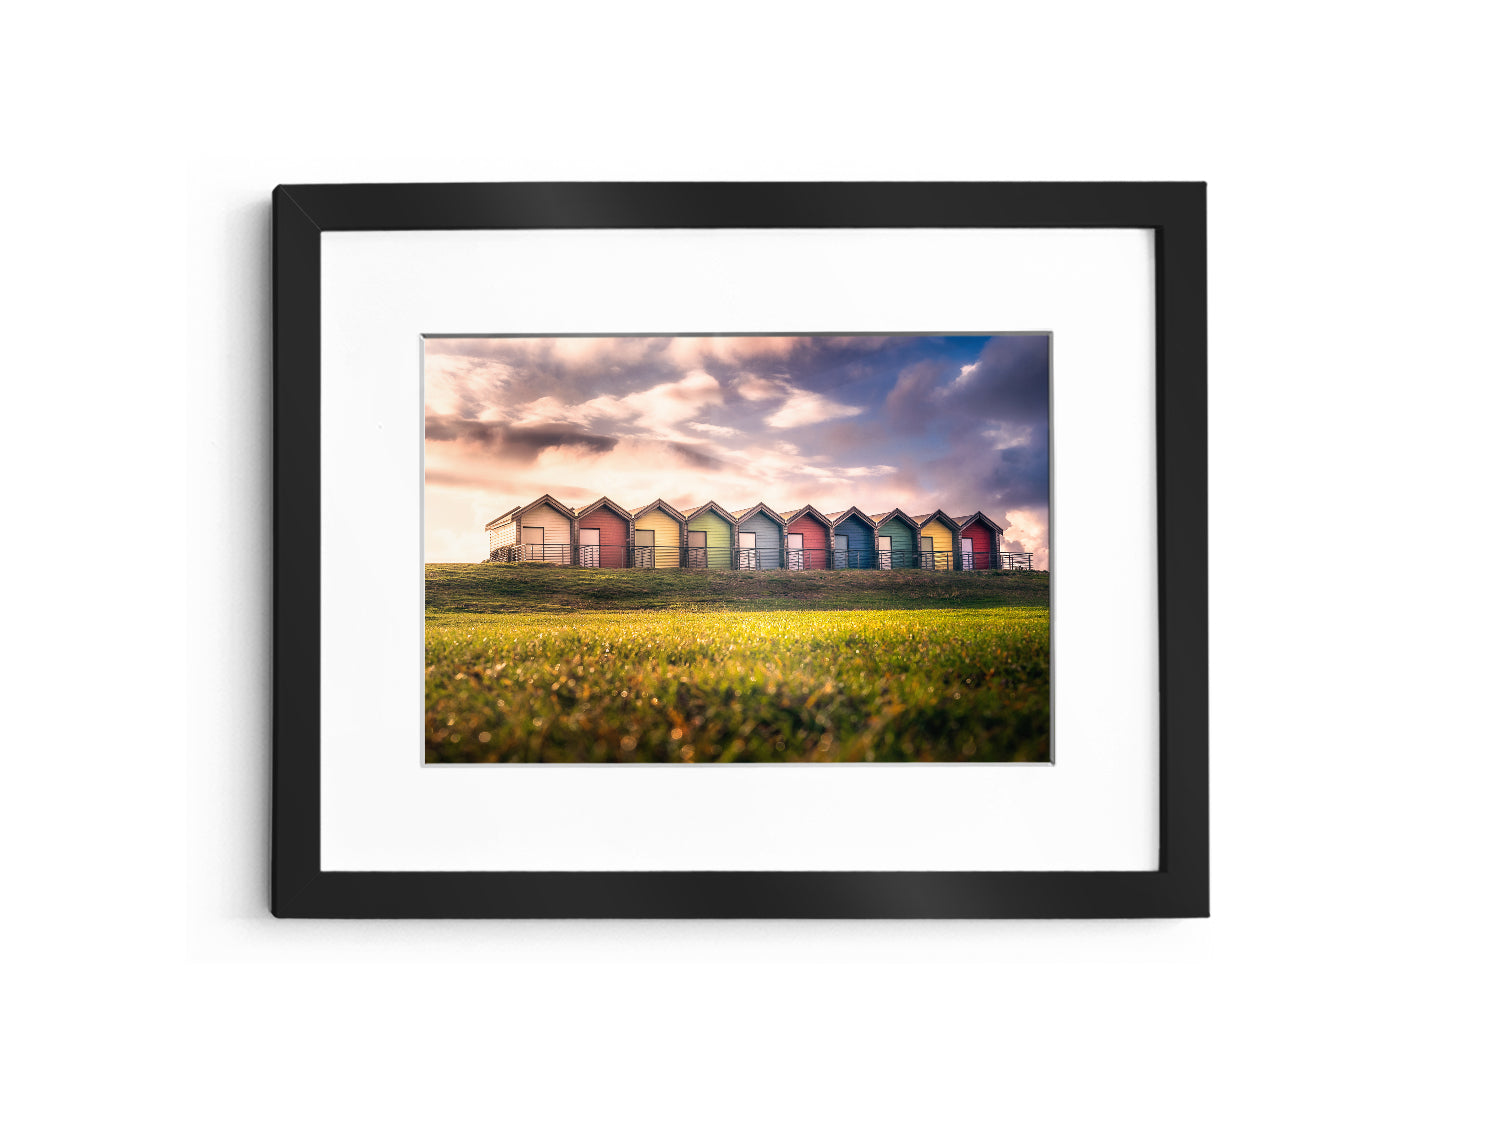 Blyth Huts From The Ground - England